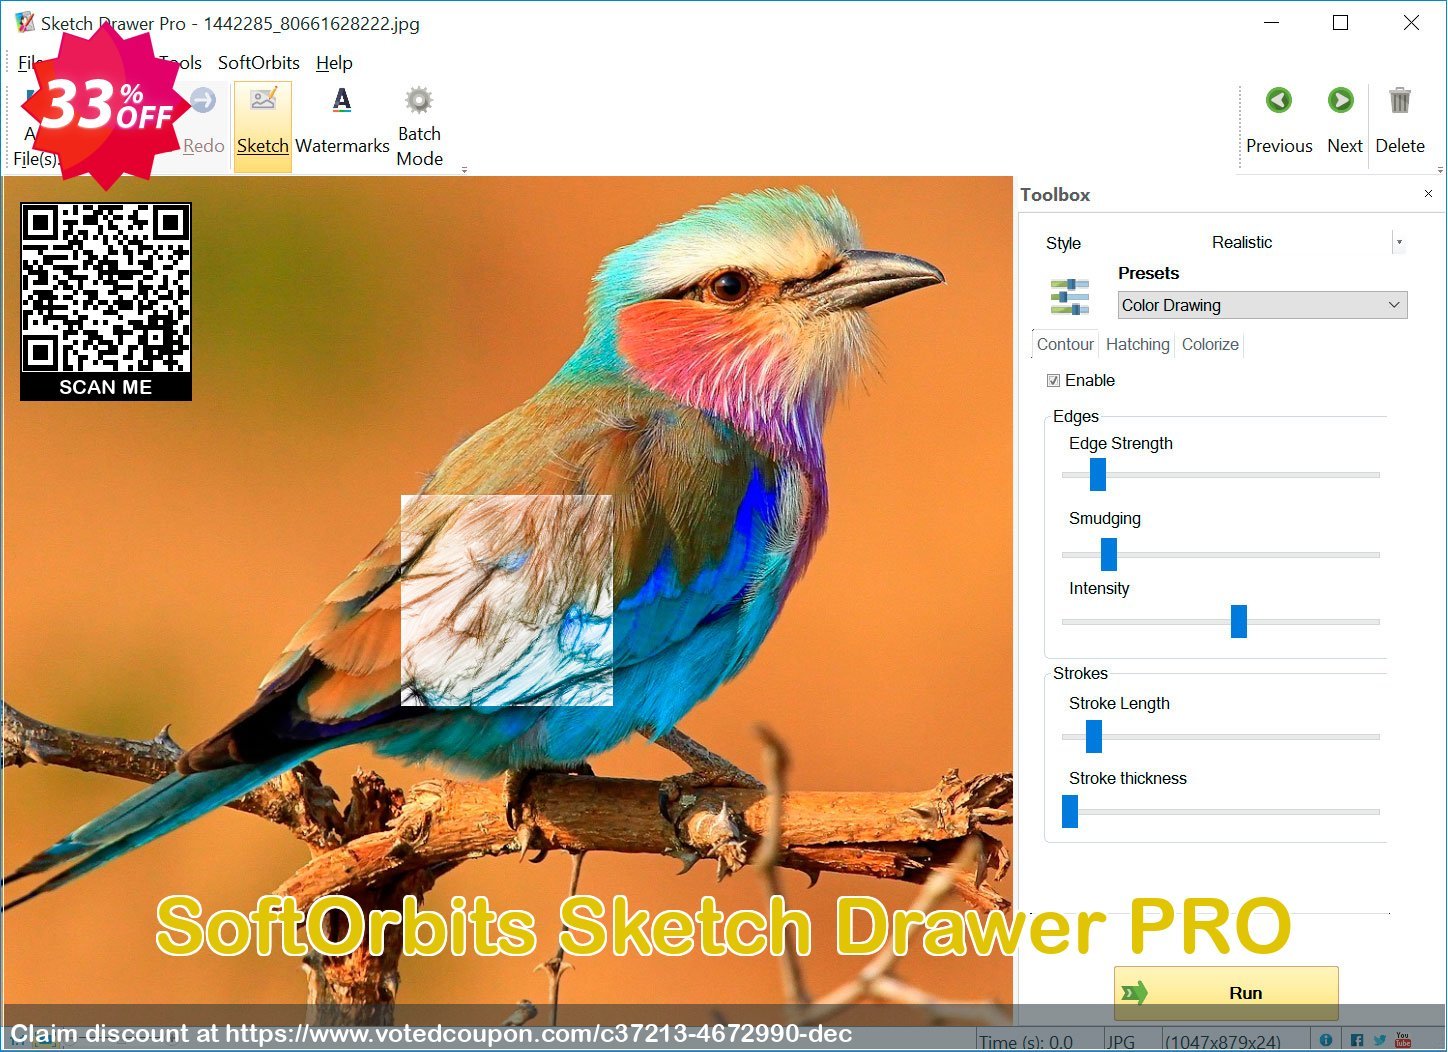 SoftOrbits Sketch Drawer PRO Coupon Code Apr 2024, 33% OFF - VotedCoupon